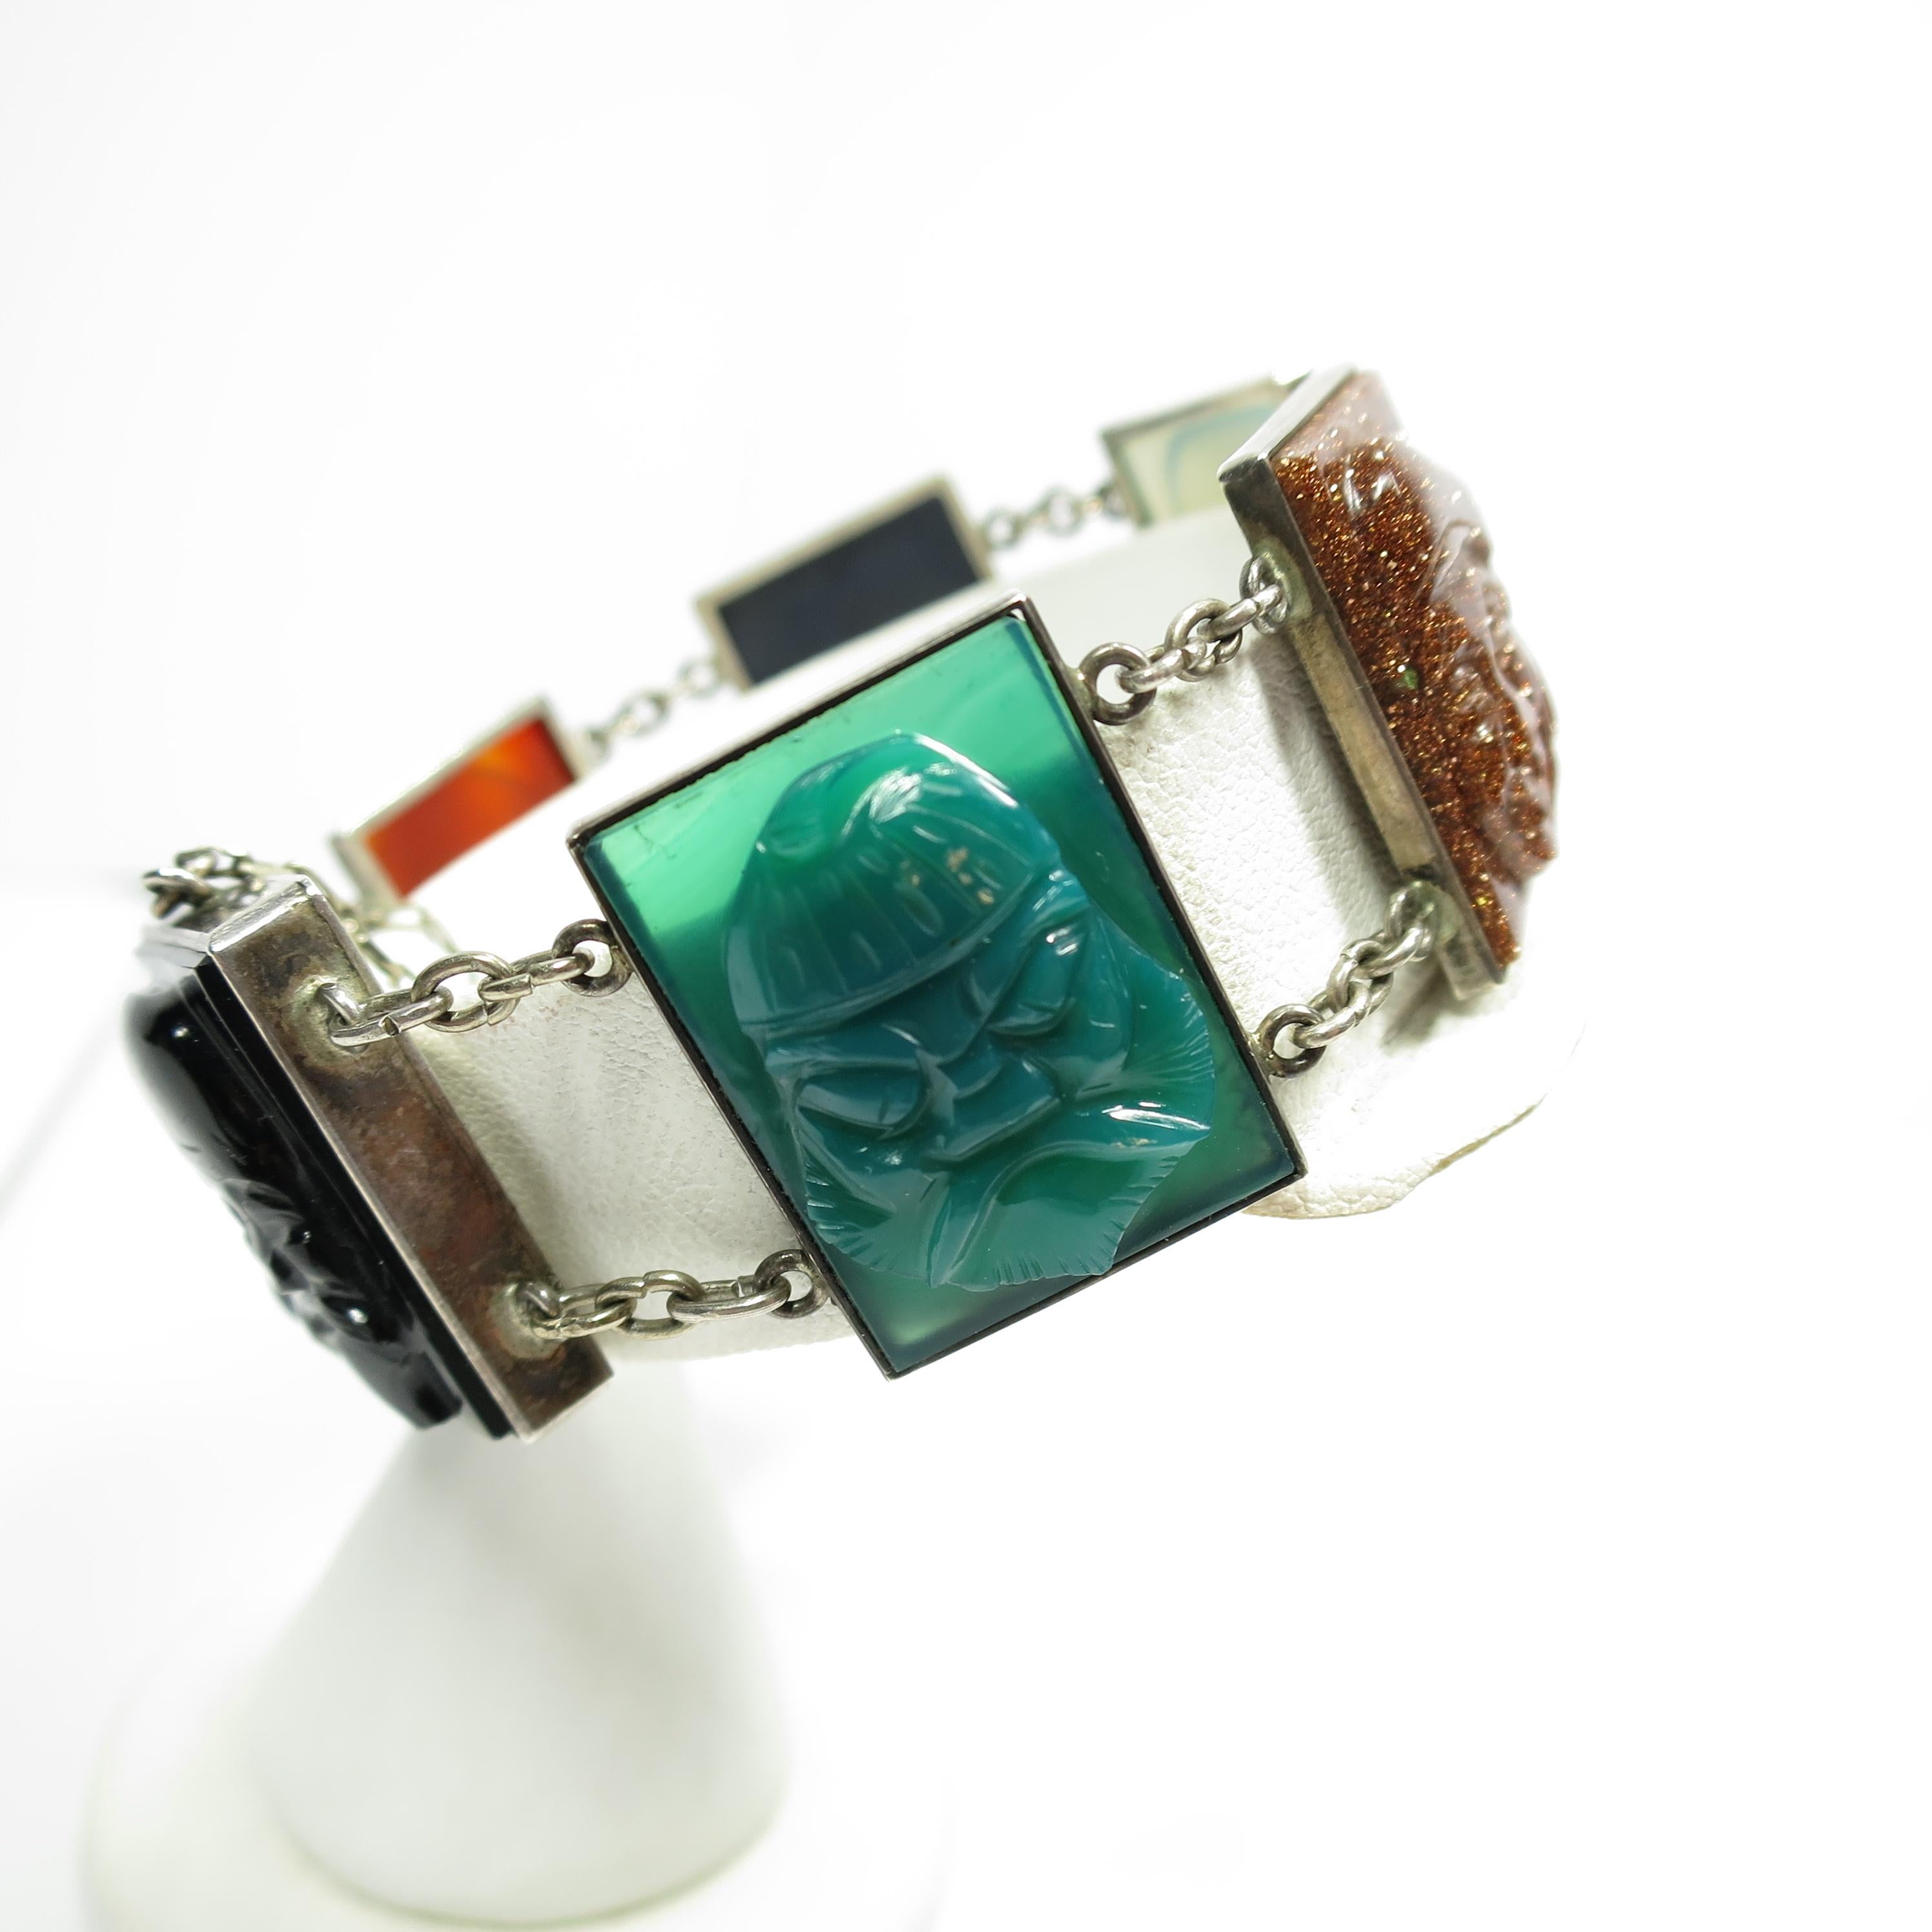 Offered here is an Art Deco Chinese silver bracelet with carved semi-precious stones from the 1920s. Narrow rectangular silver frames present open-back bezel-set stones of chrysoprase, carnelian, goldstone, lapis, onyx, and pale lavender jade; the